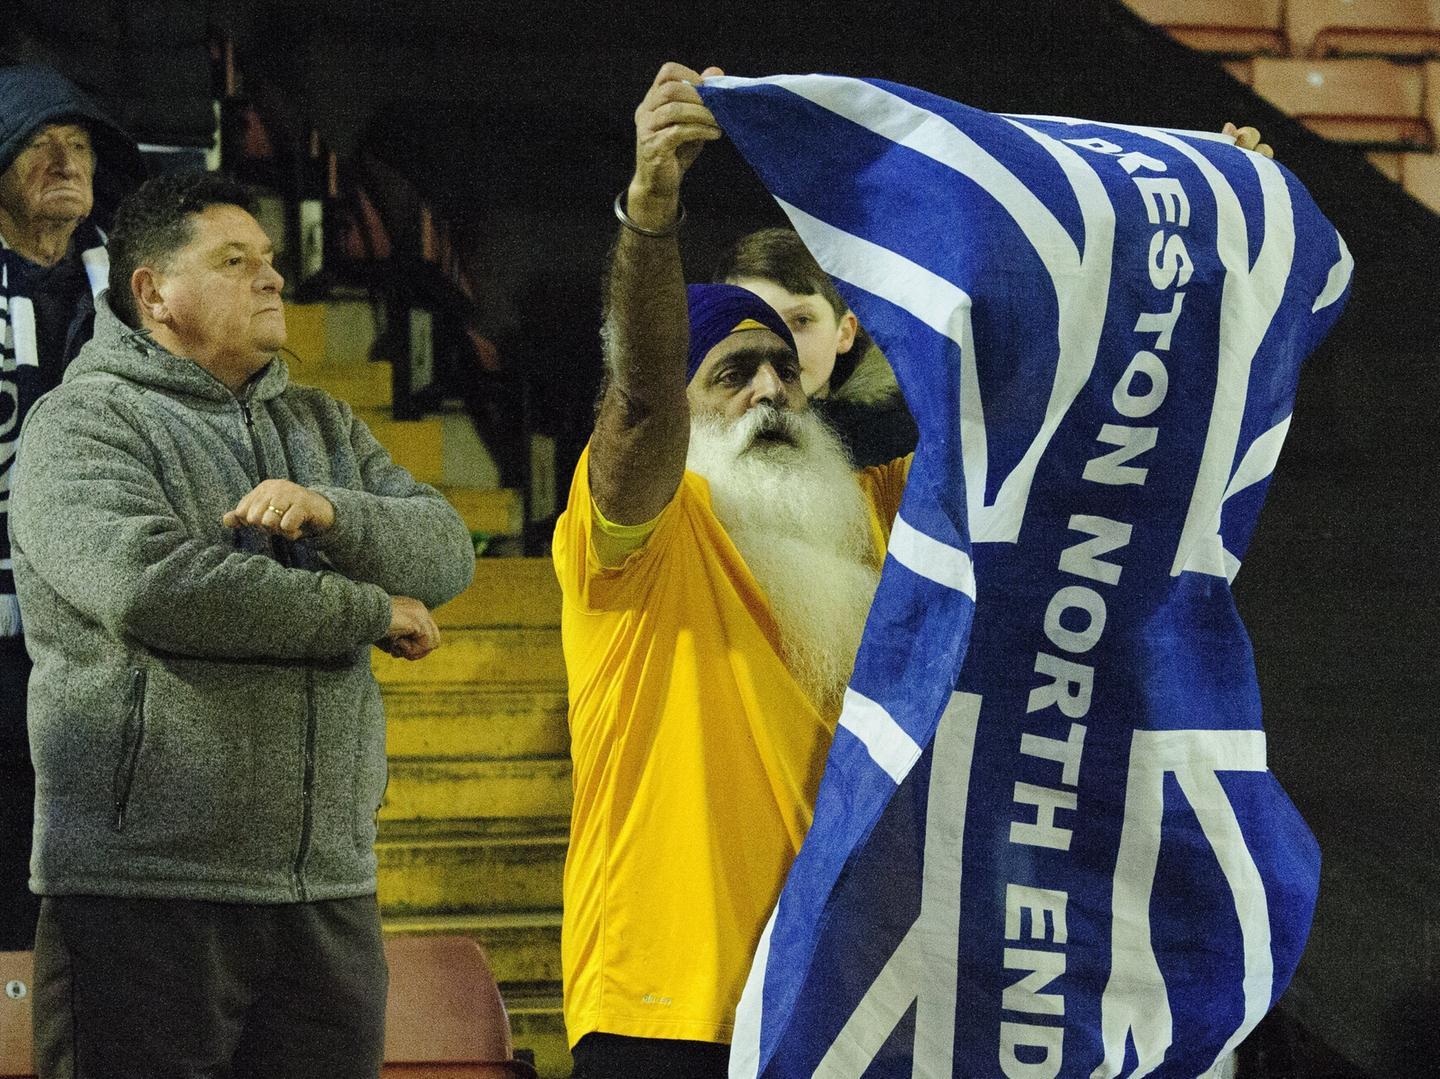 One PNE fan has his flag at the ready to show his support for the visitors.